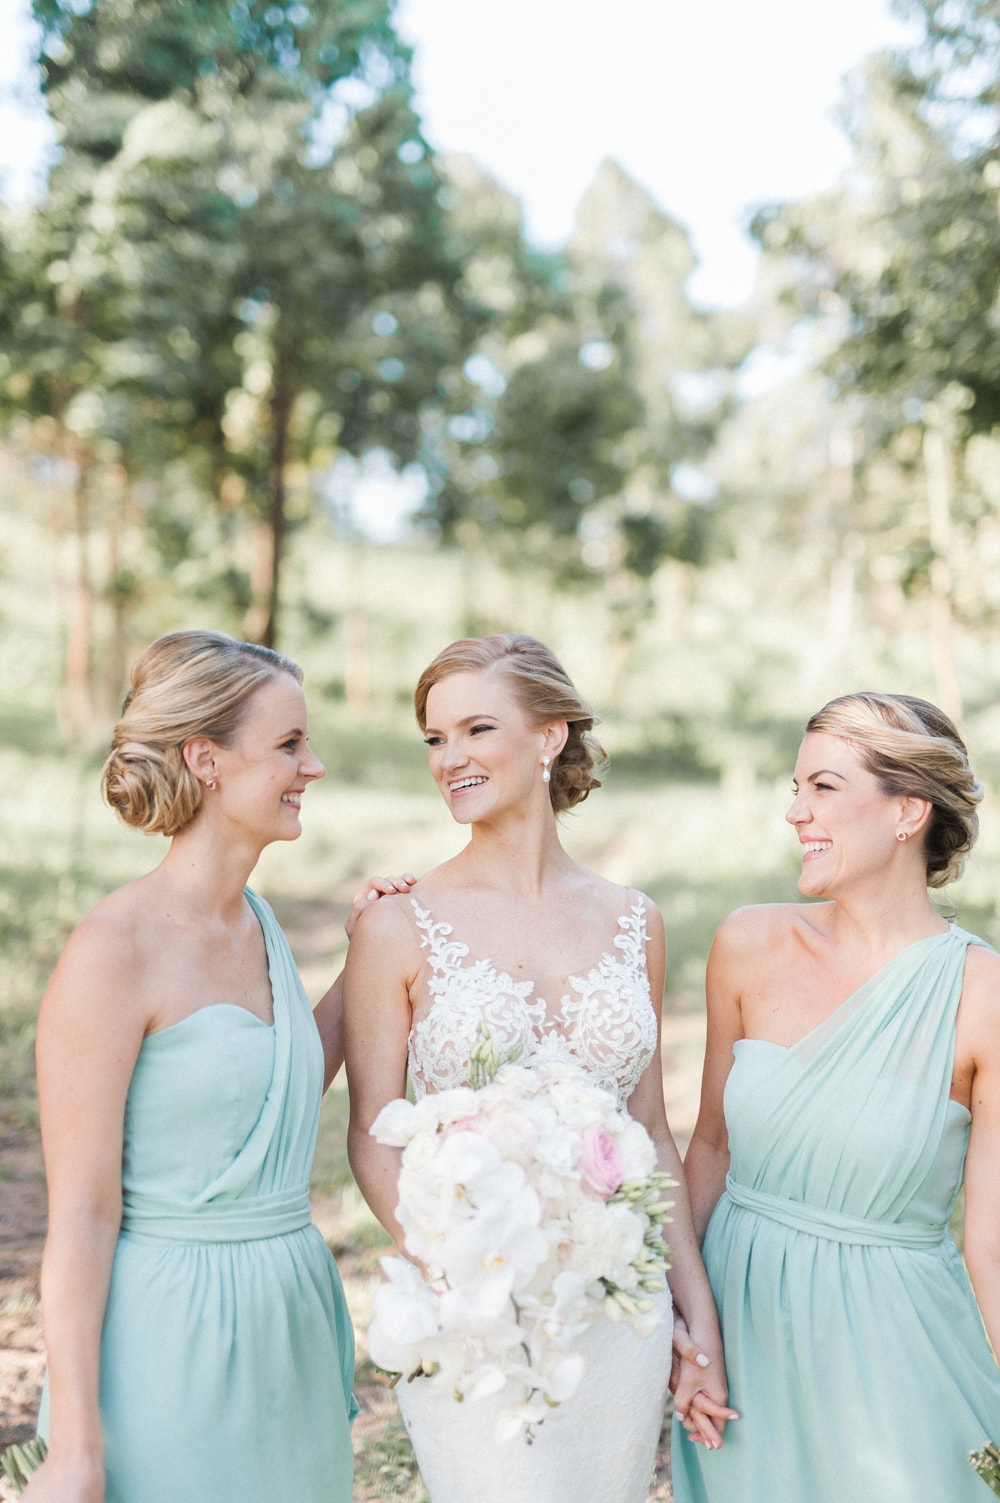 Mint Bridesmaid Dresses | Image: Bright Girl Photography